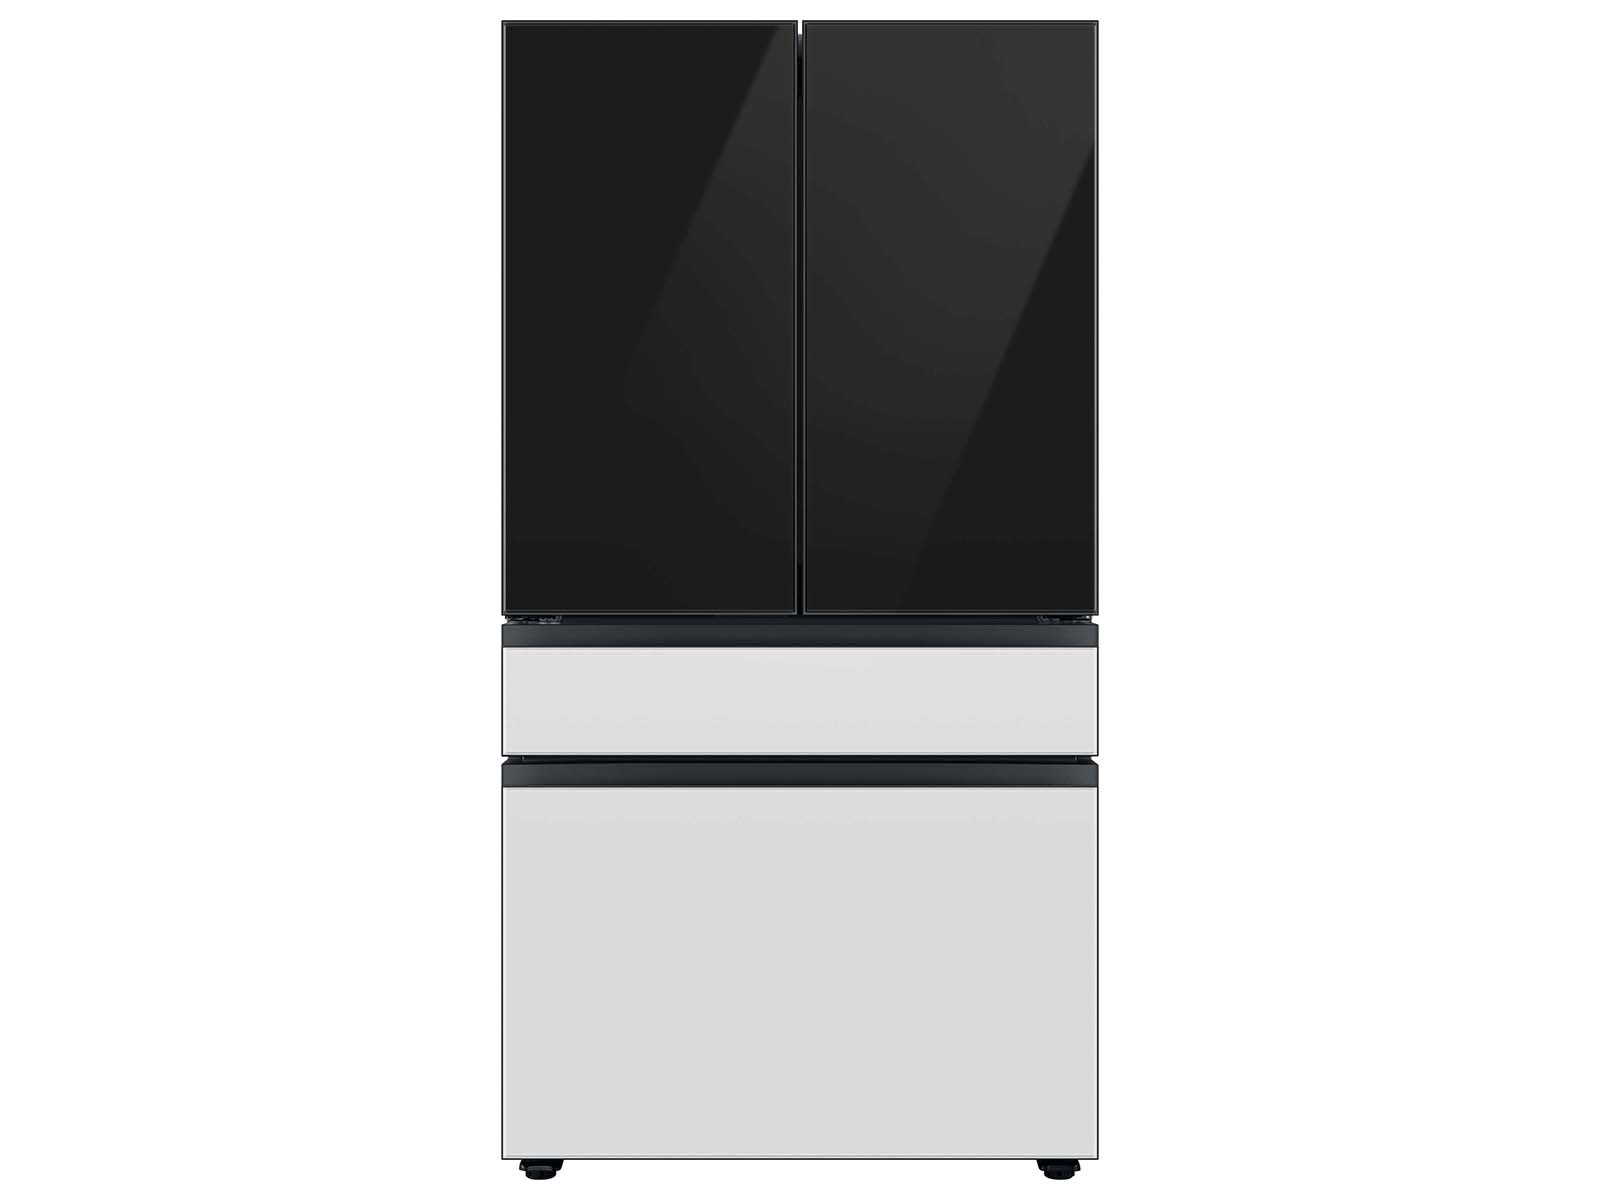 Bespoke 4-Door French Door Refrigerator (29 cu. ft.) with Customizable Door Panel Colors and Beverage Center™ in Charcoal Glass Top Panels with White Glass Middle and Bottom Panel